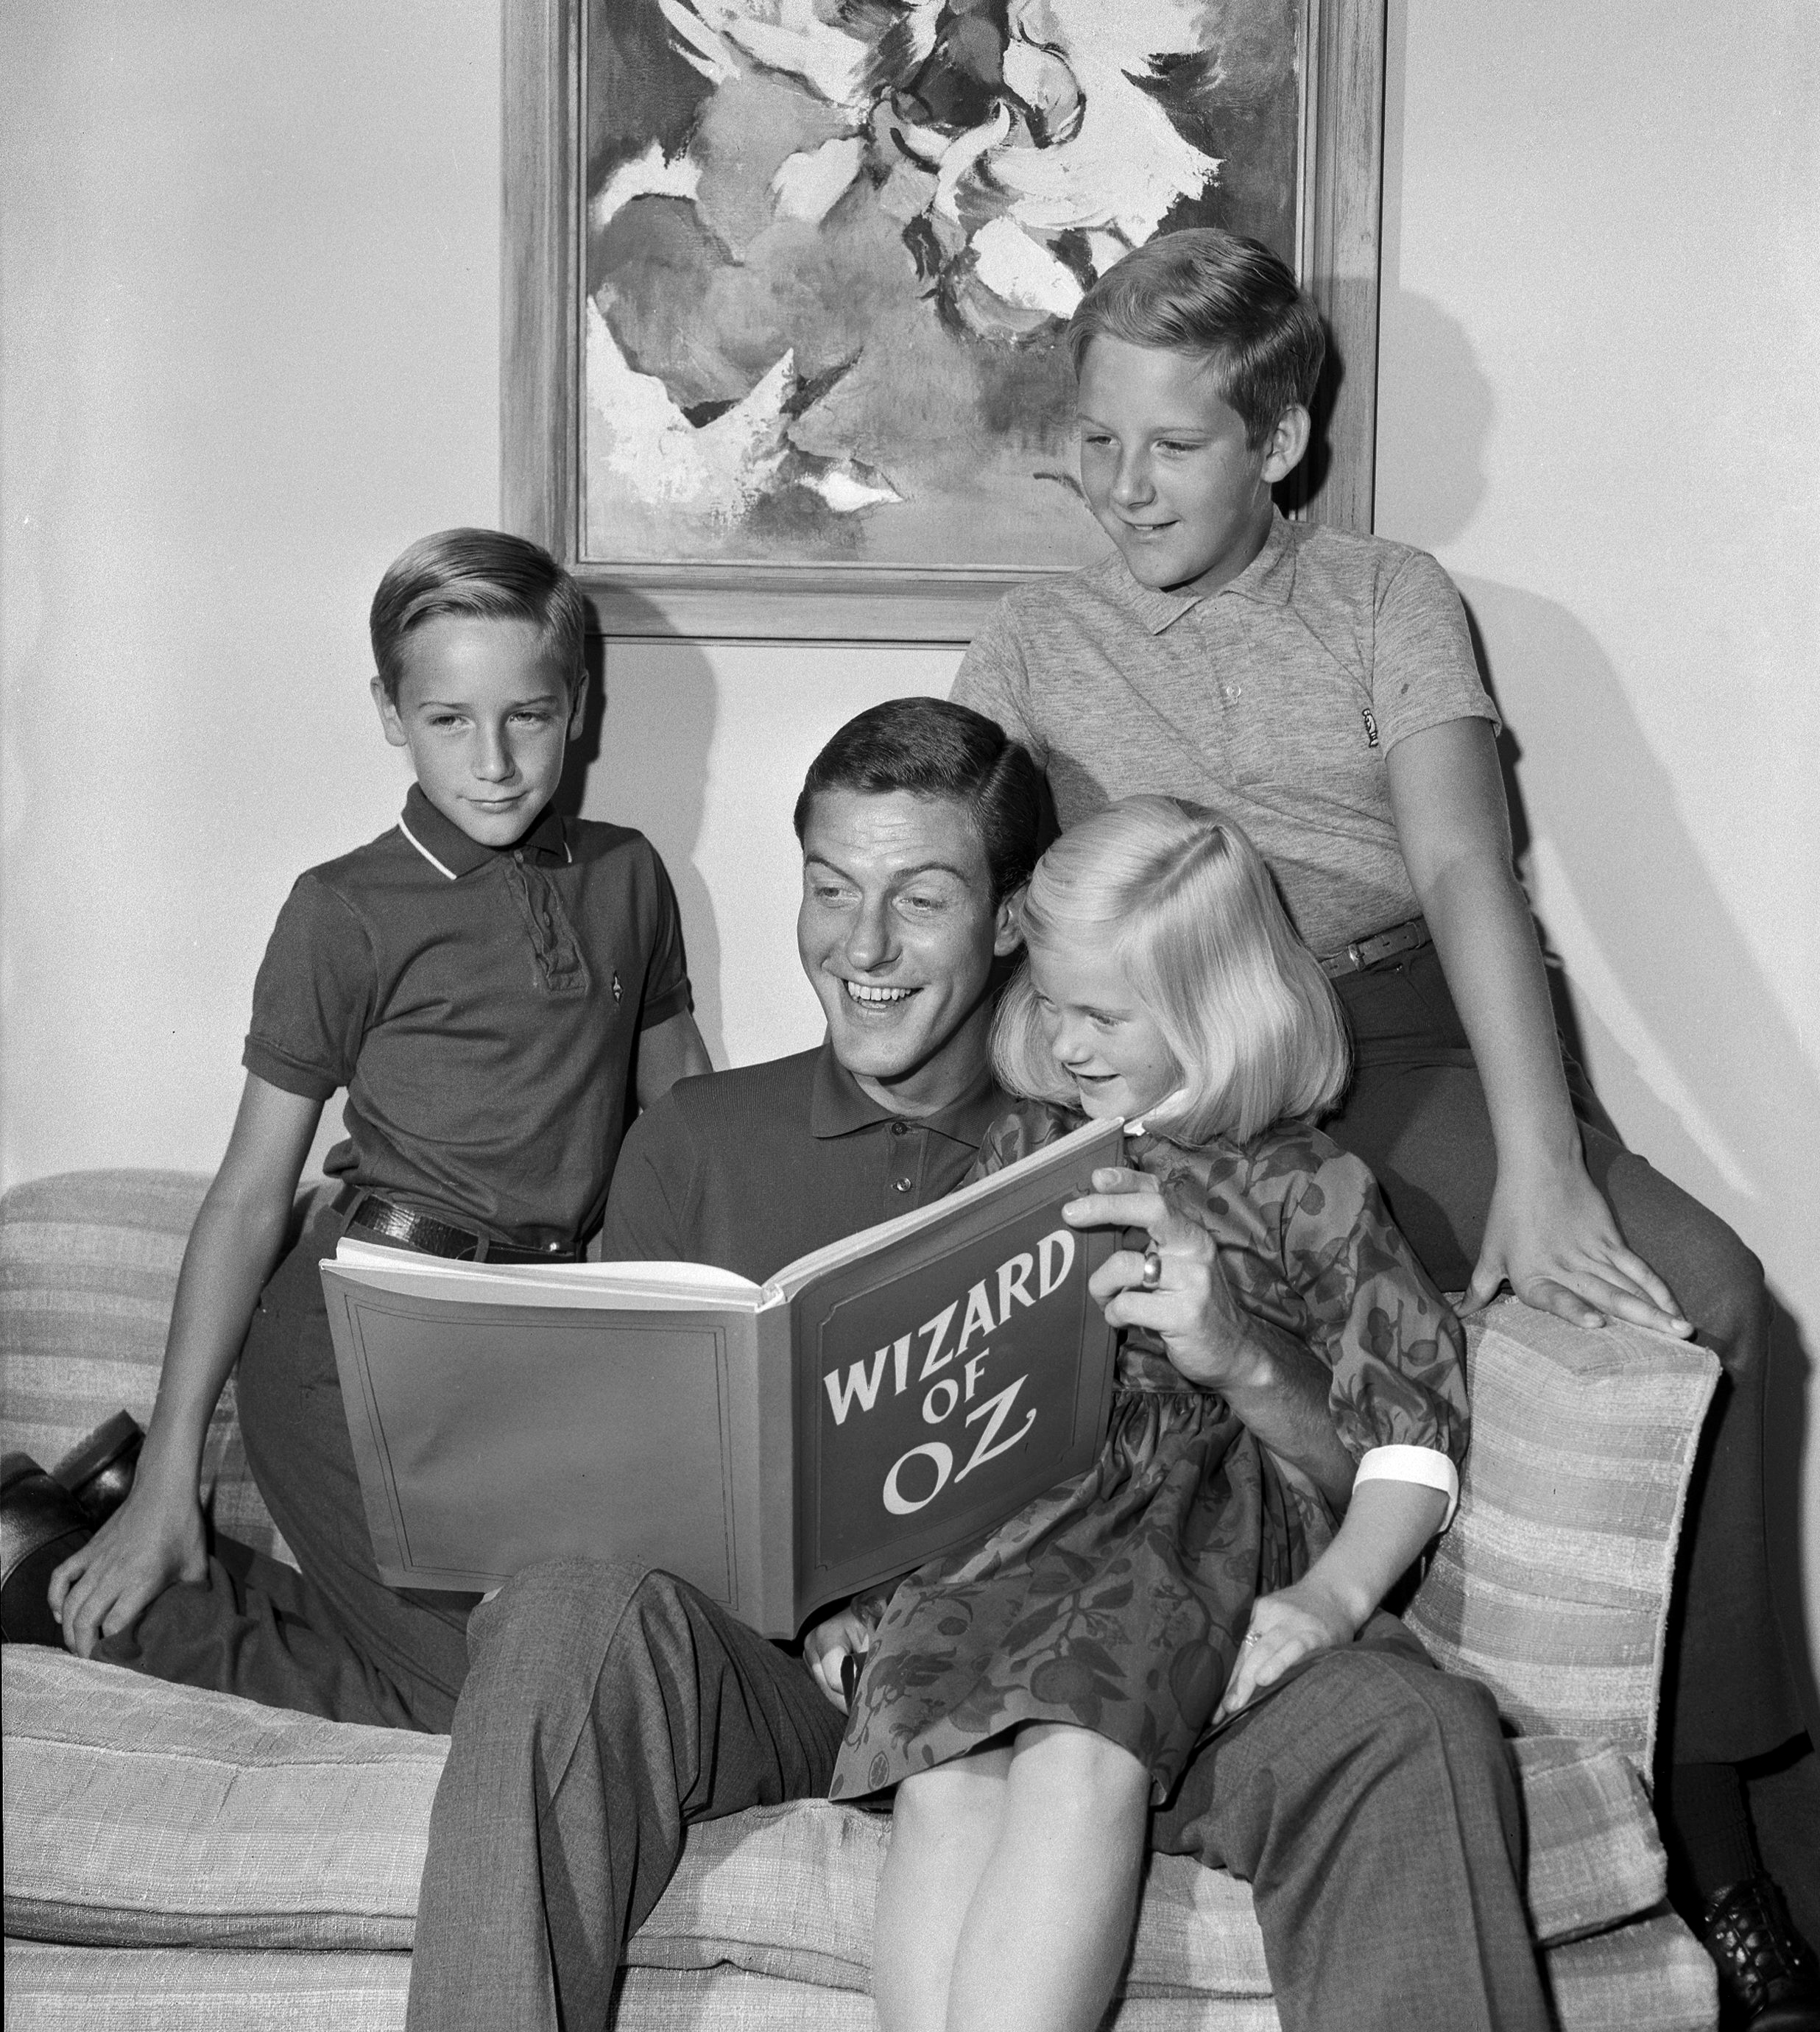 Dick Van Dyke with his children, (clockwise from top) Chris, Stacey and Barry Van Dyke doing "lead-ins" for the special broadcast of "The Wizard of Oz" on October 14, 1961. | Source: Getty Images